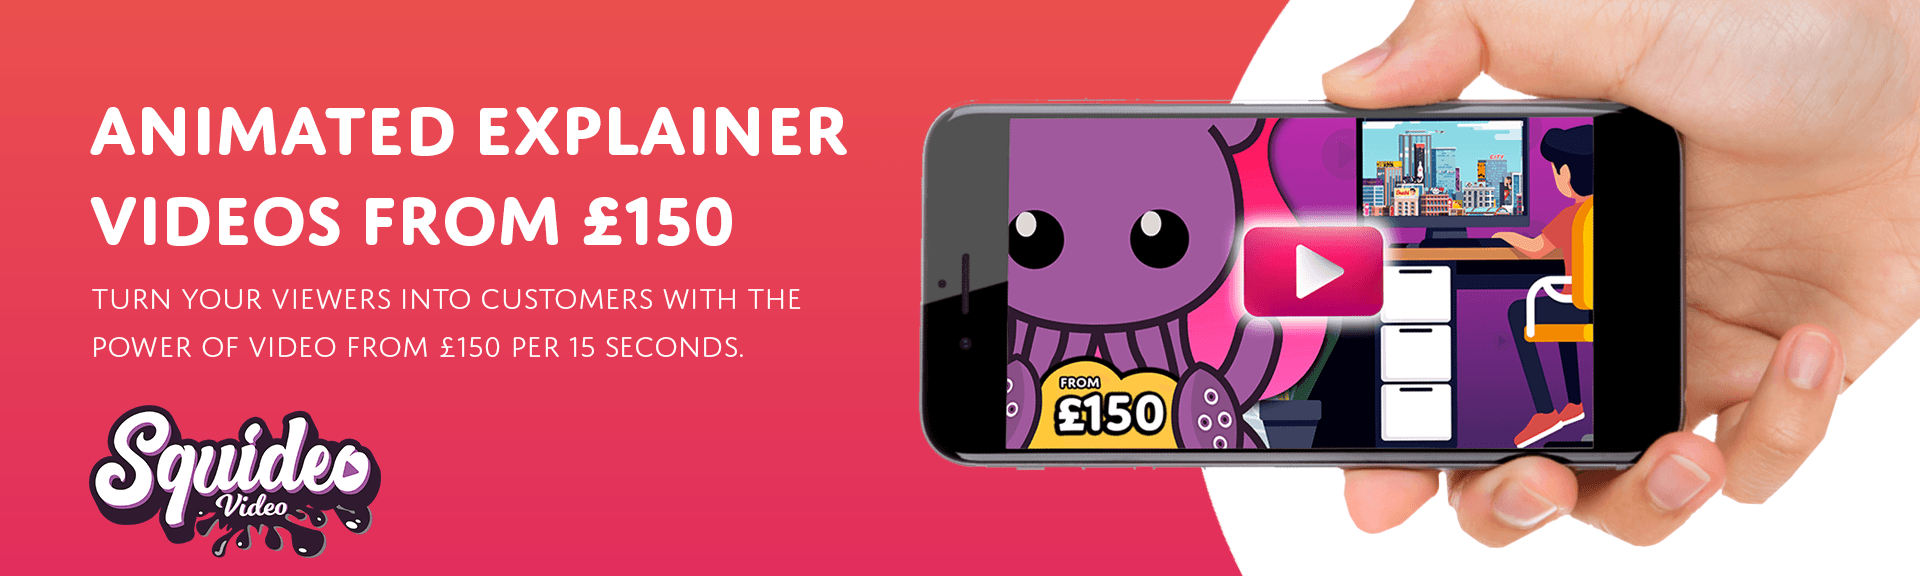 Animated Explainer Videos from £150